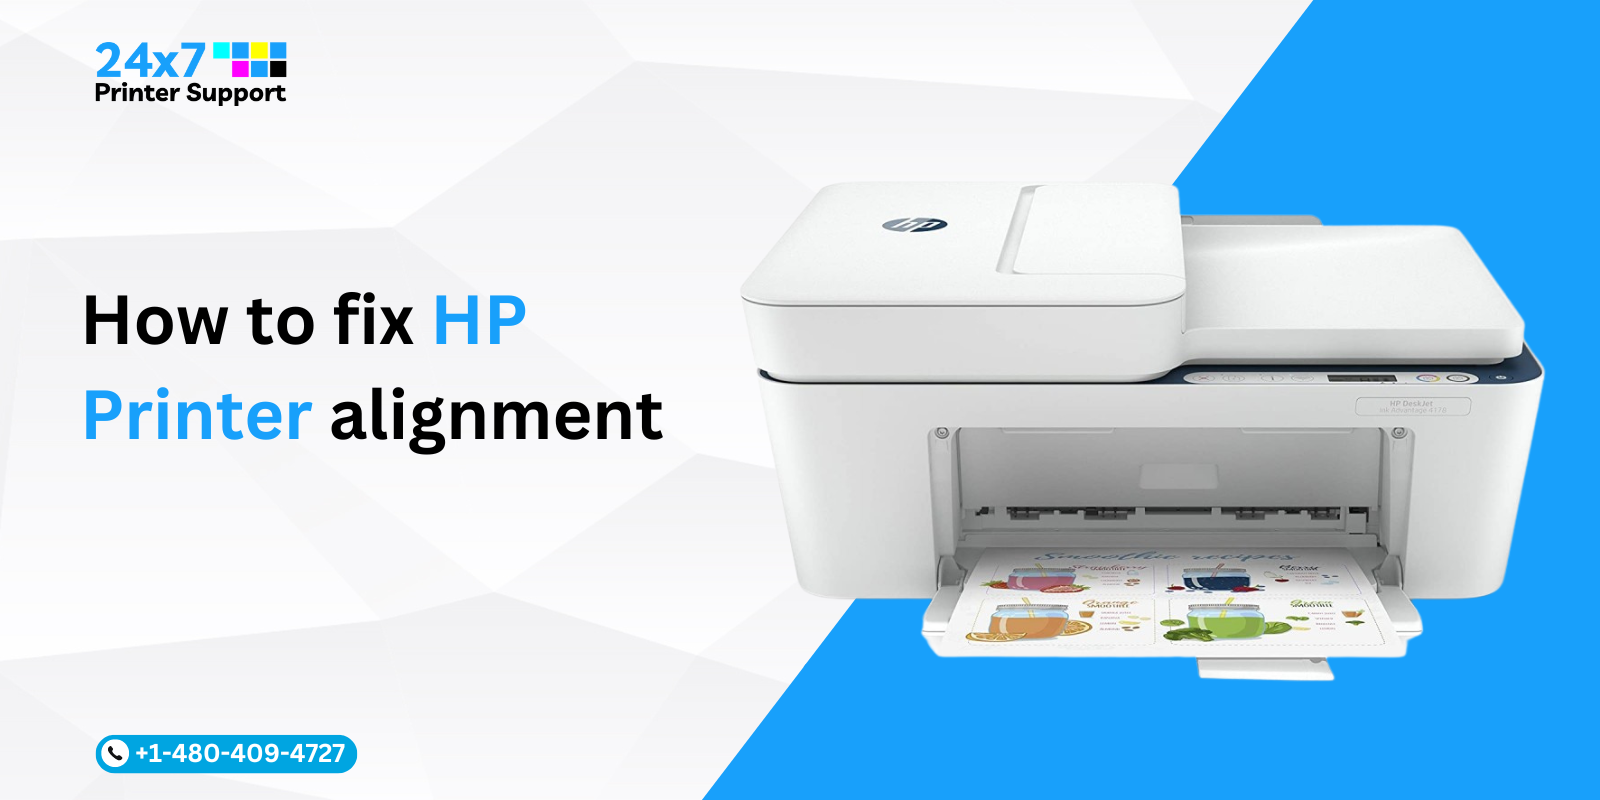 How to Fix HP Printer Alignment